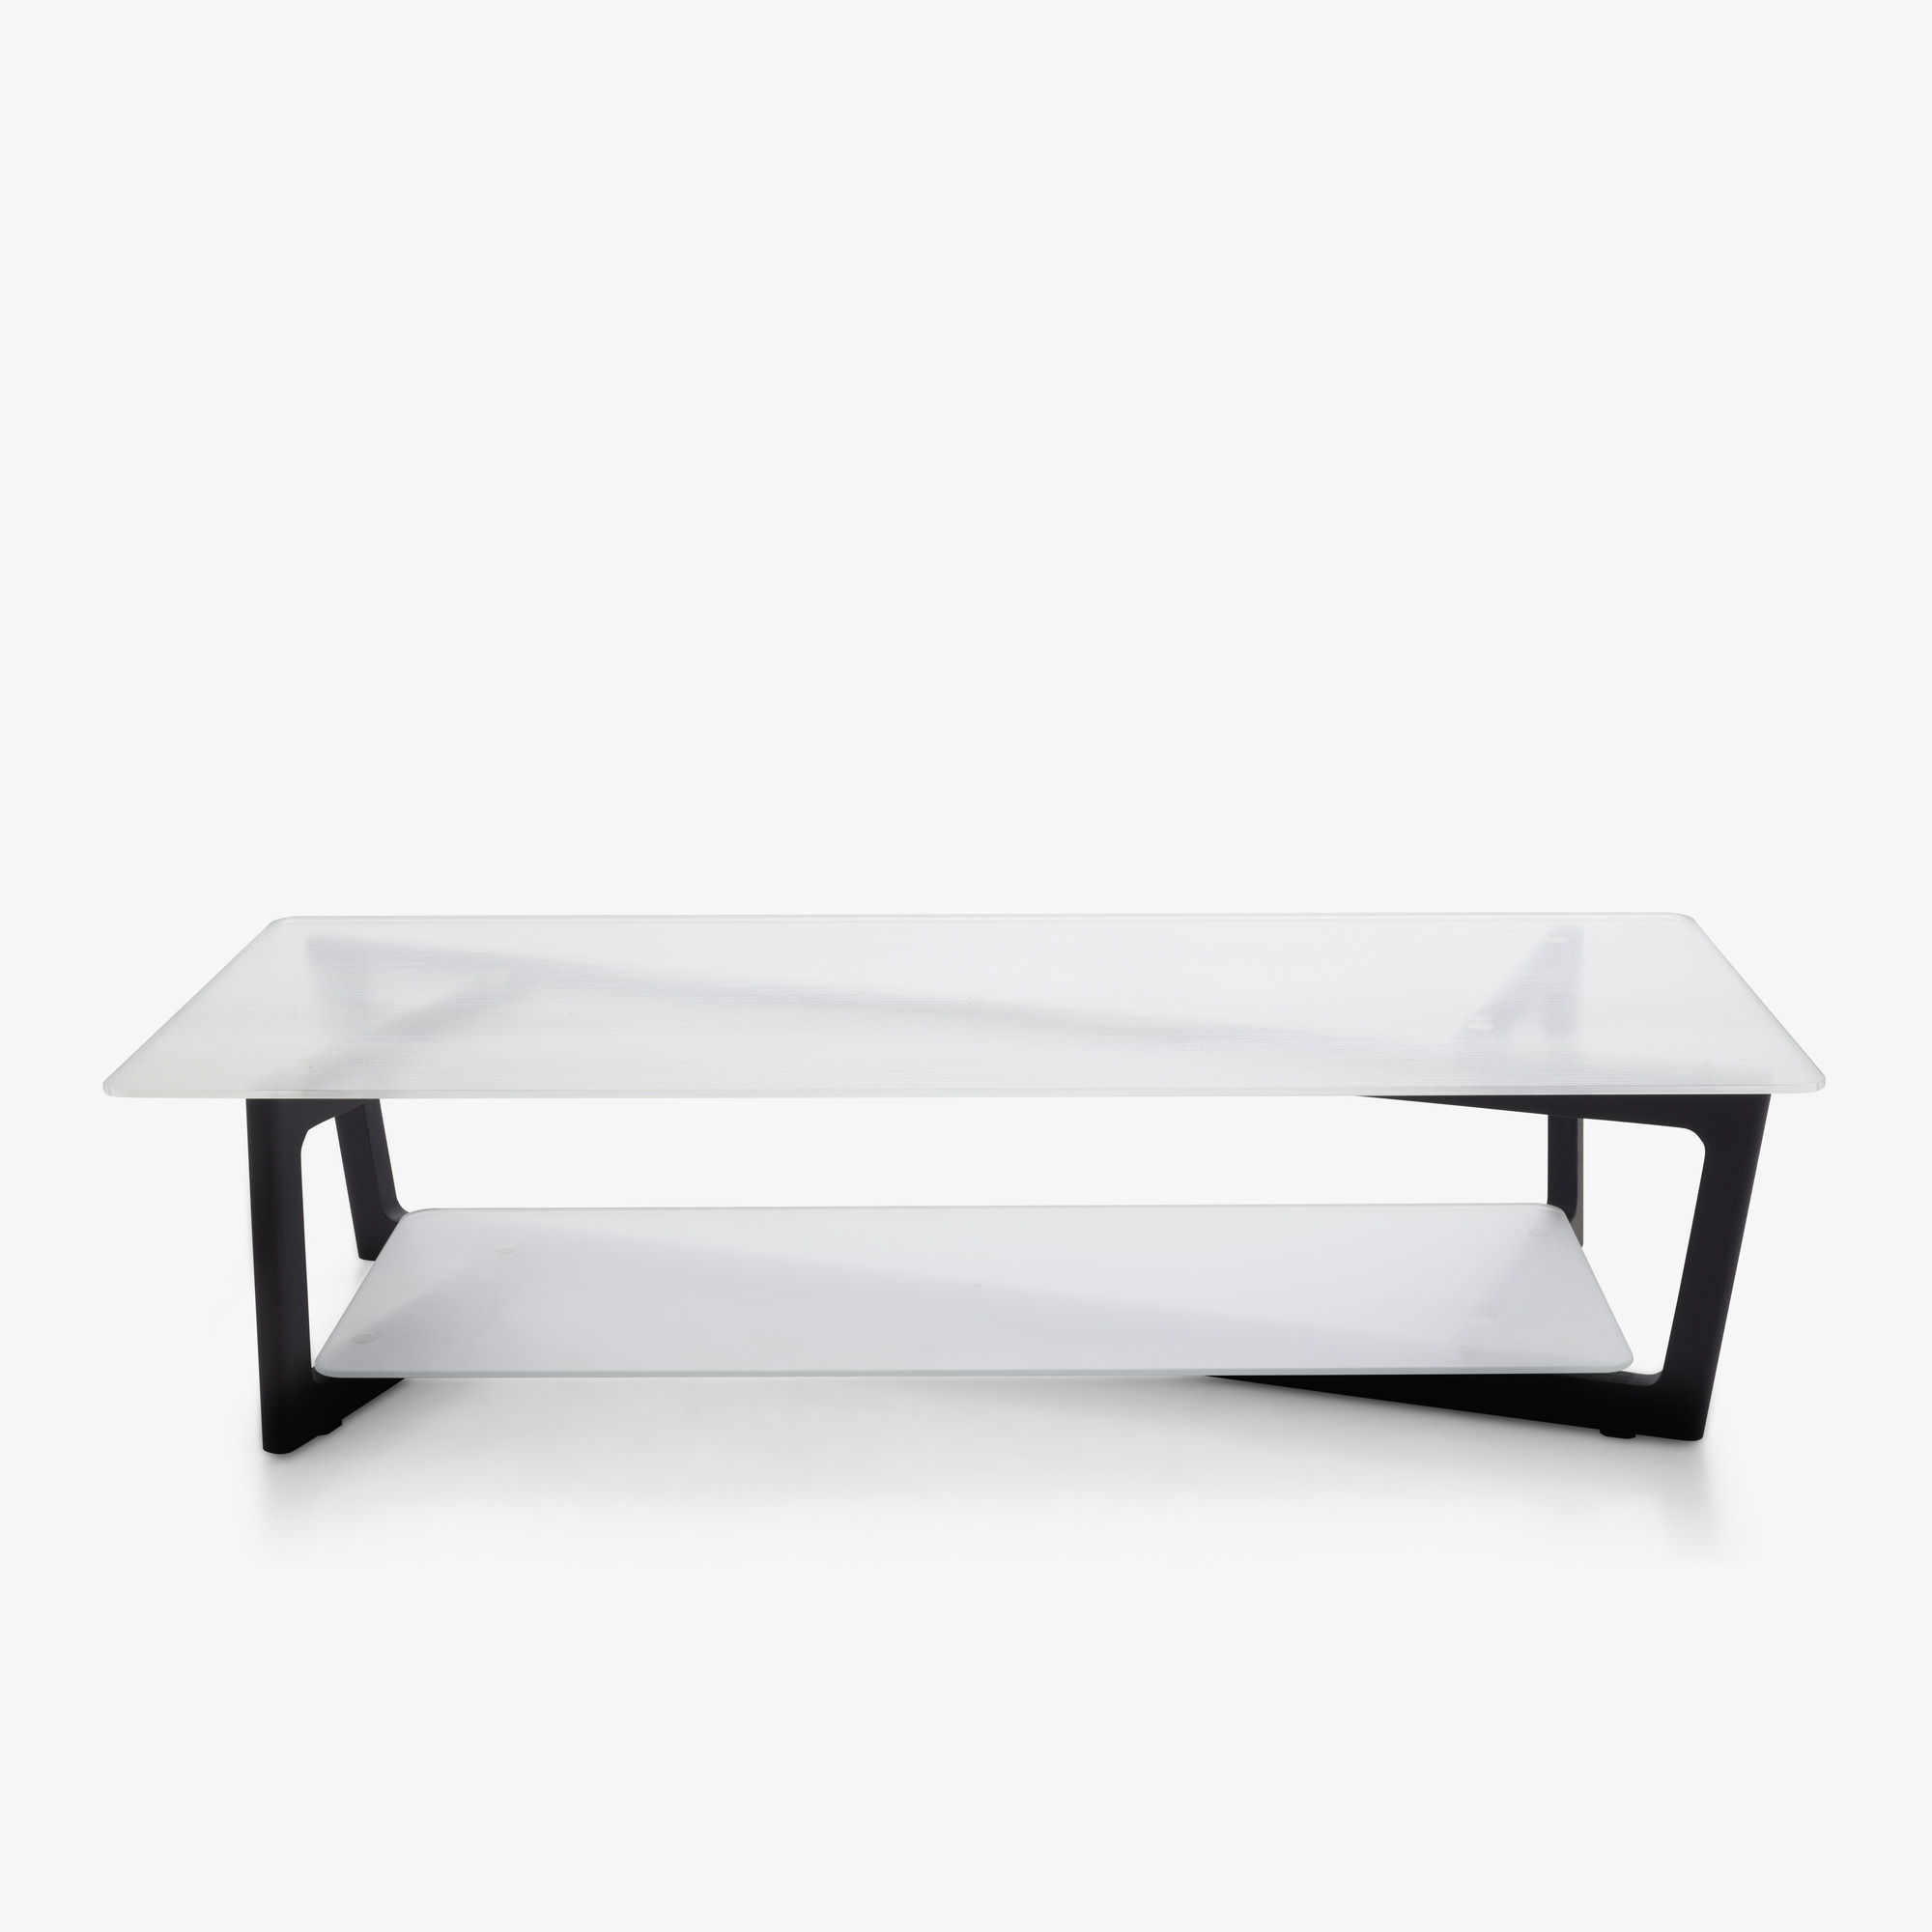 Image LOW TABLE BLACK STAINED ASH 